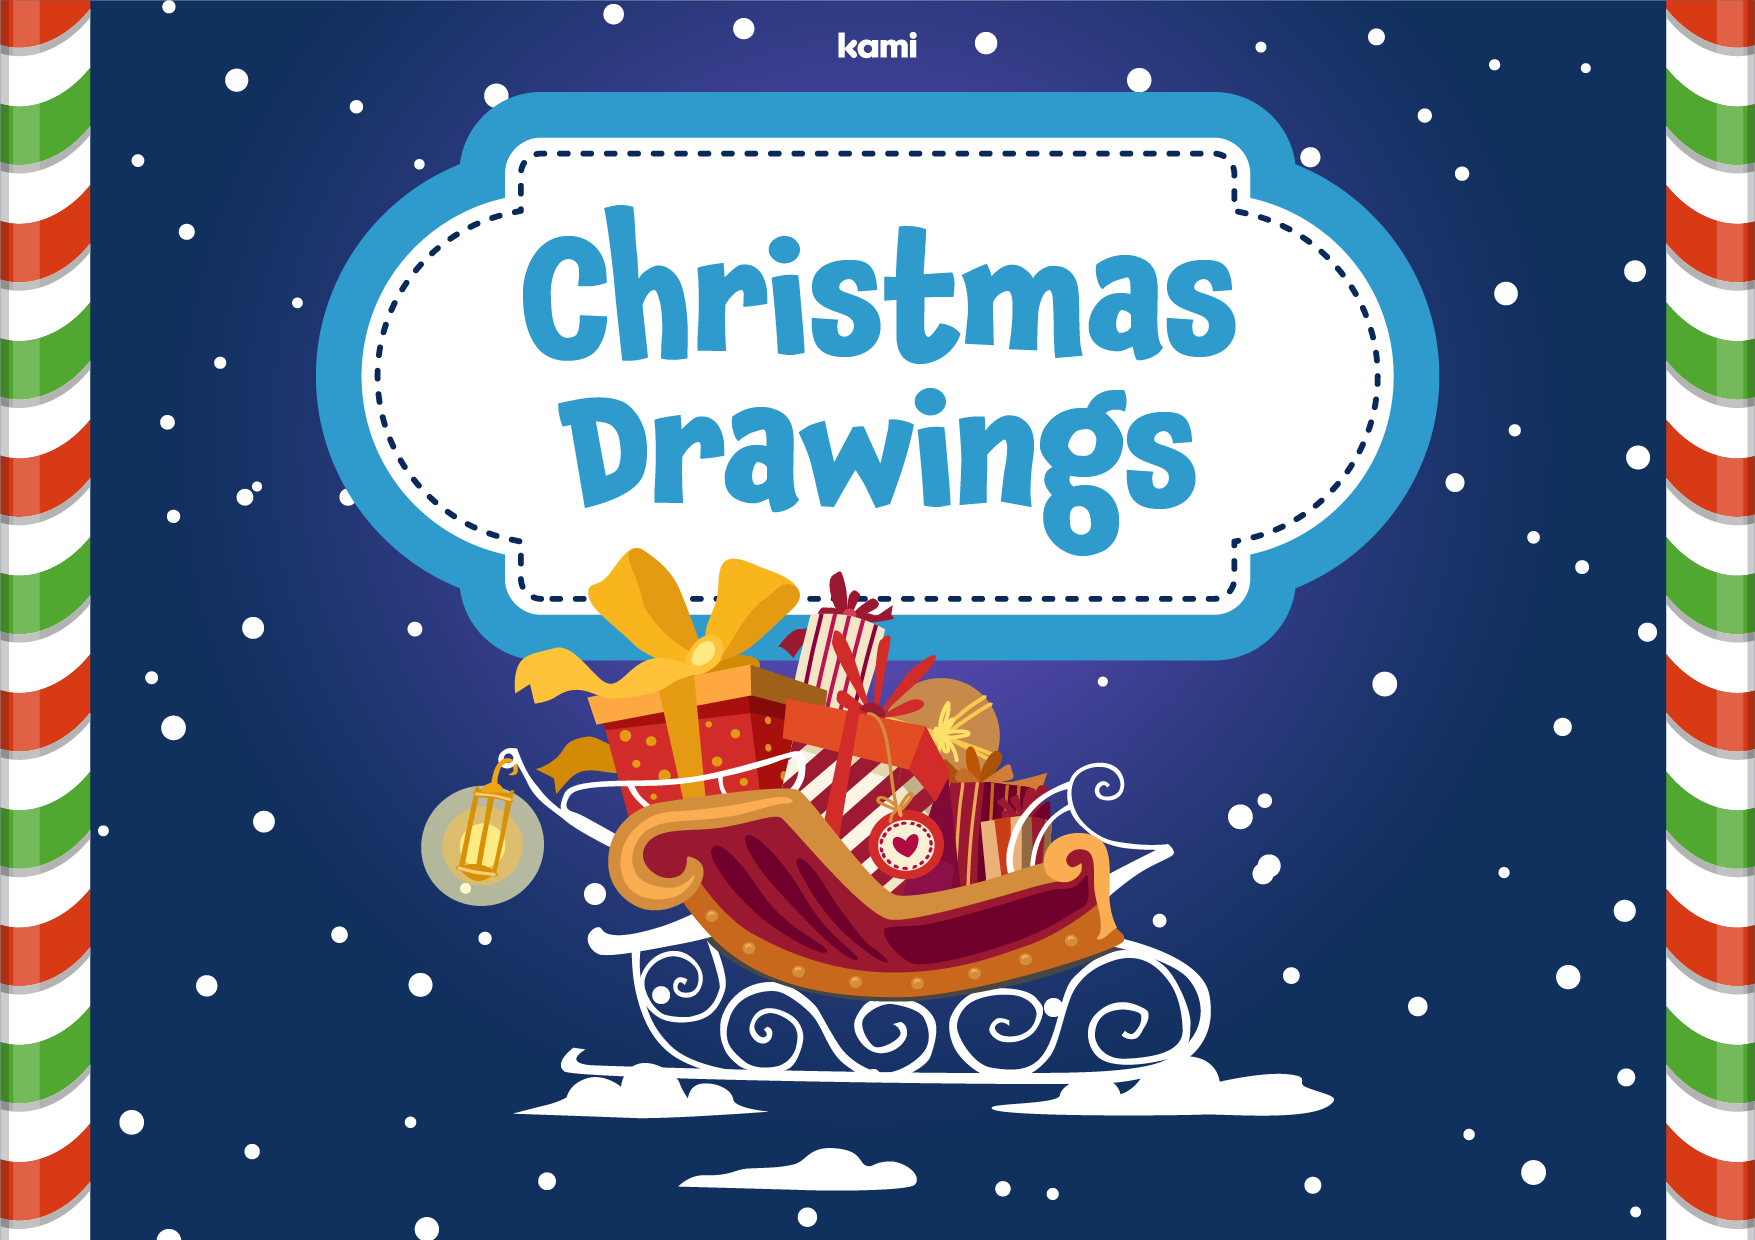 A pack for practising drawings with a Christmas design.